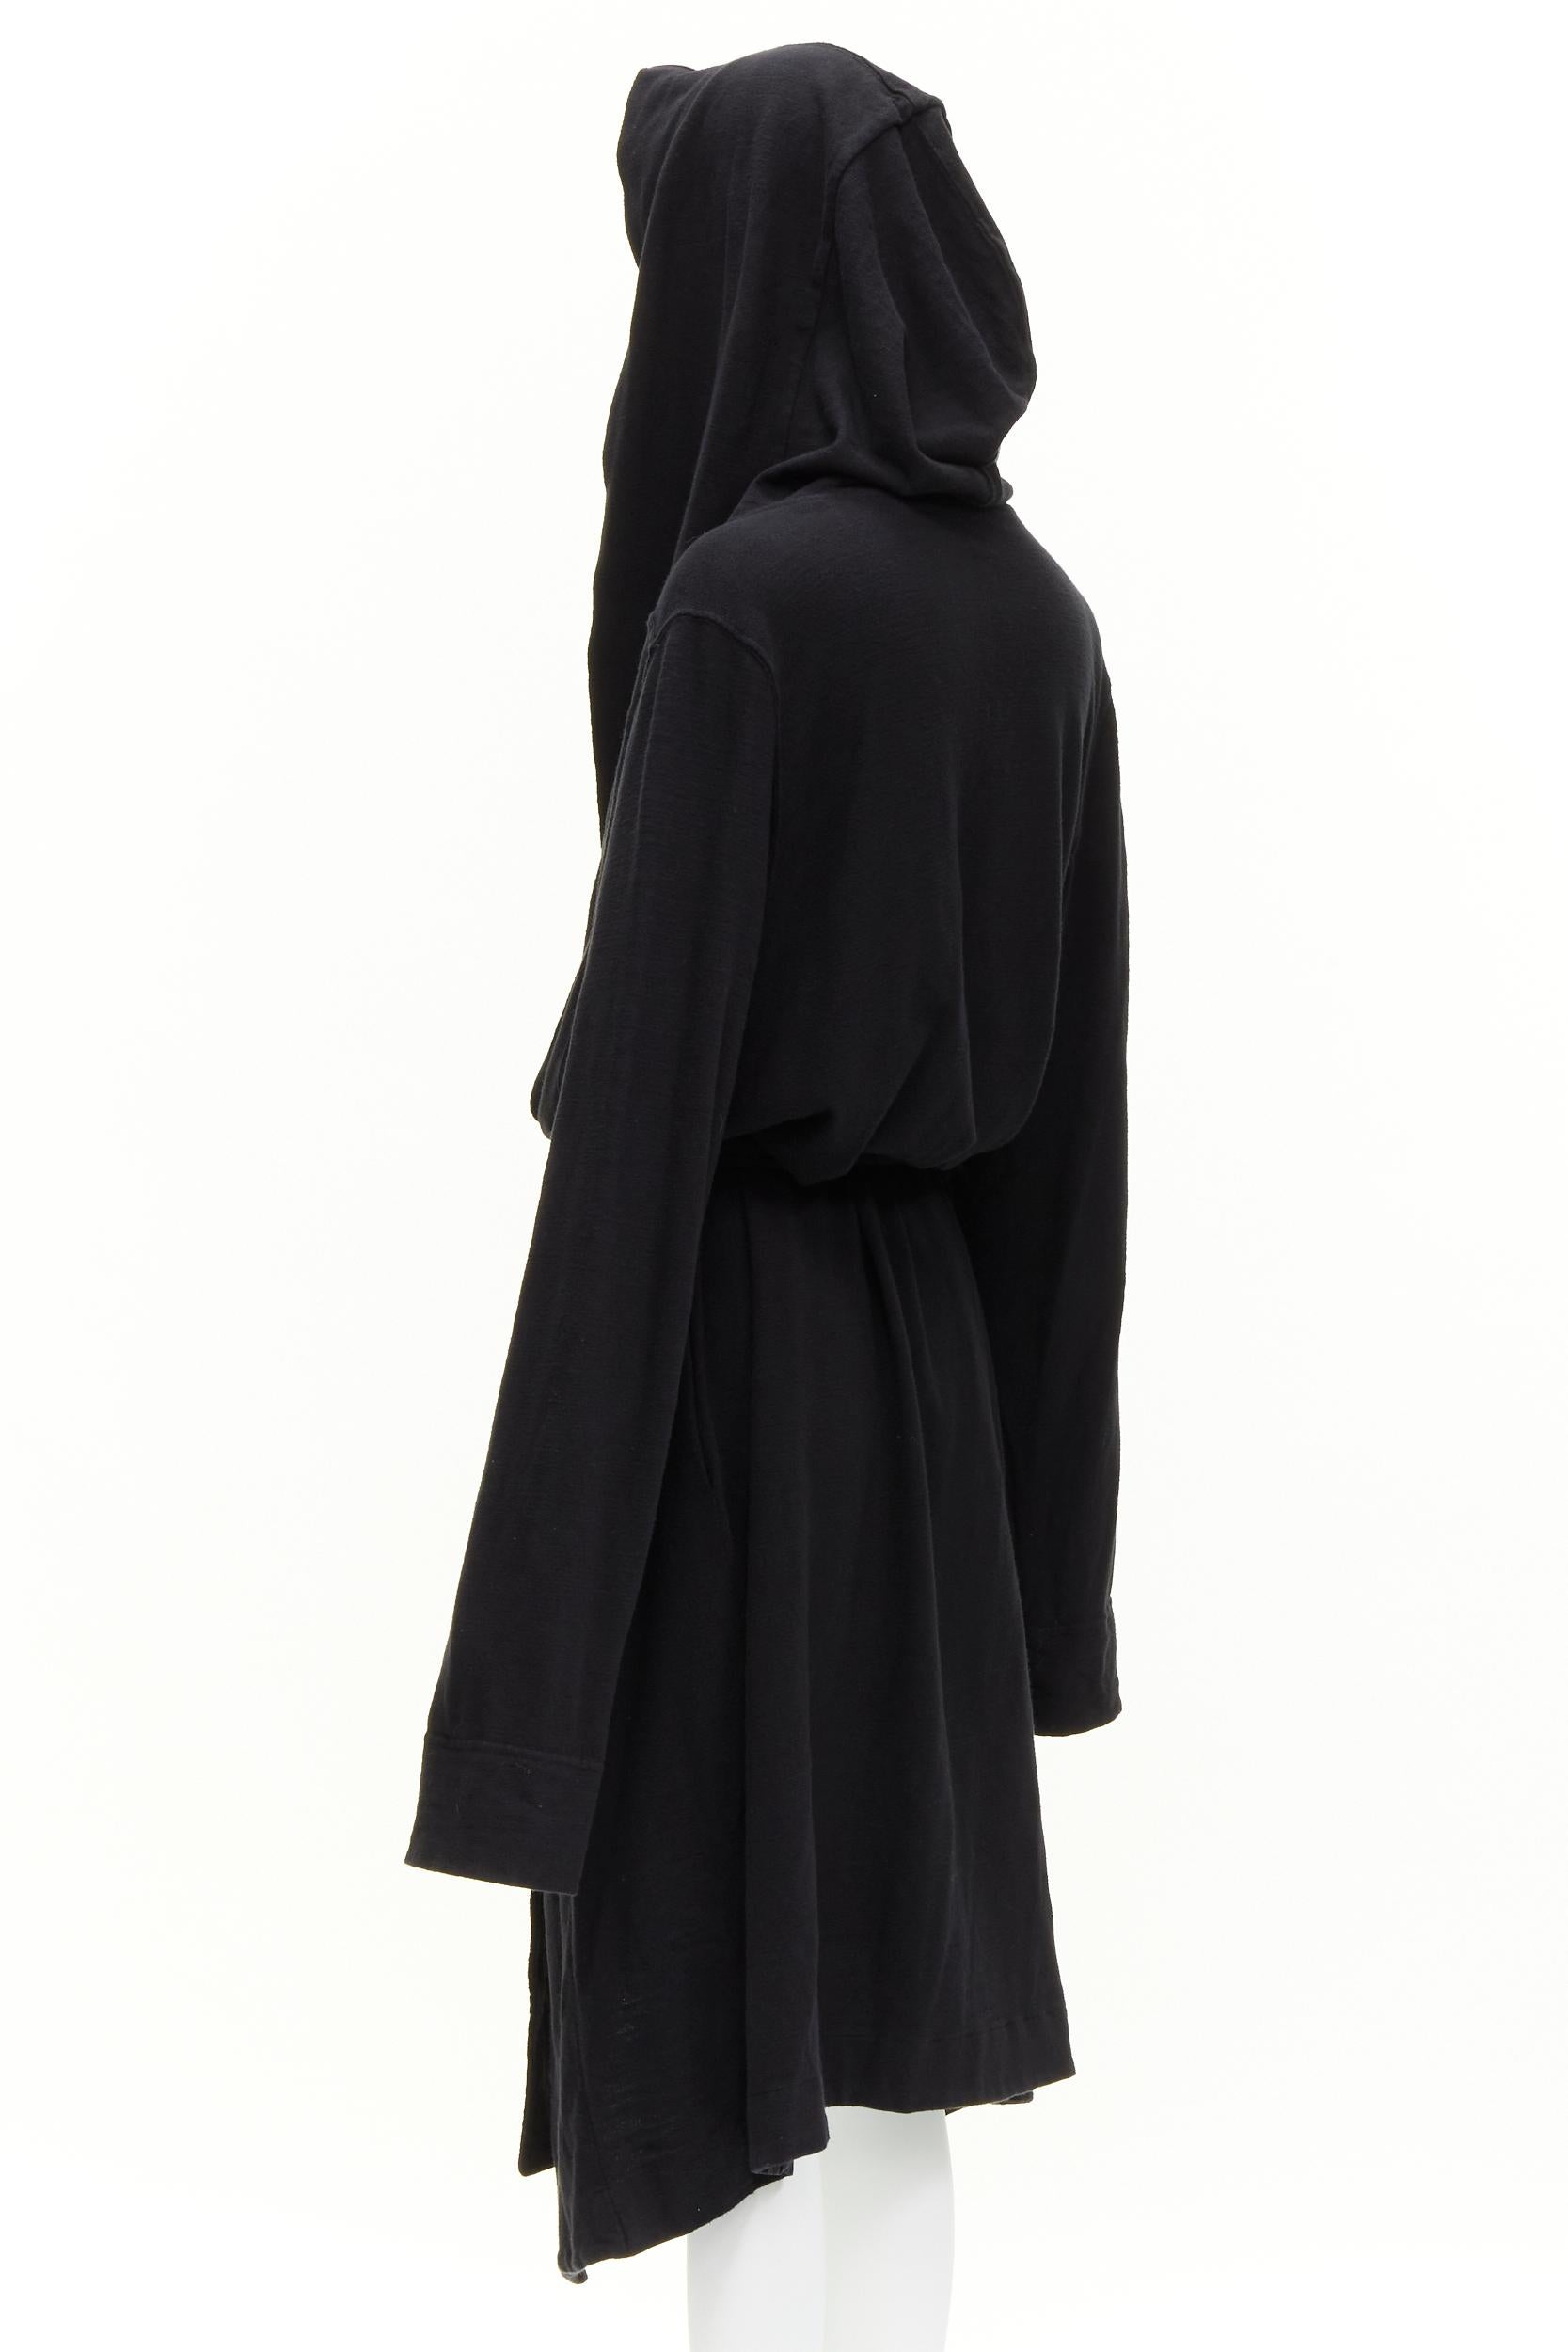 RICK OWENS DRKSHDW black cotton thick jersey hooded belted robe jacket S For Sale 1